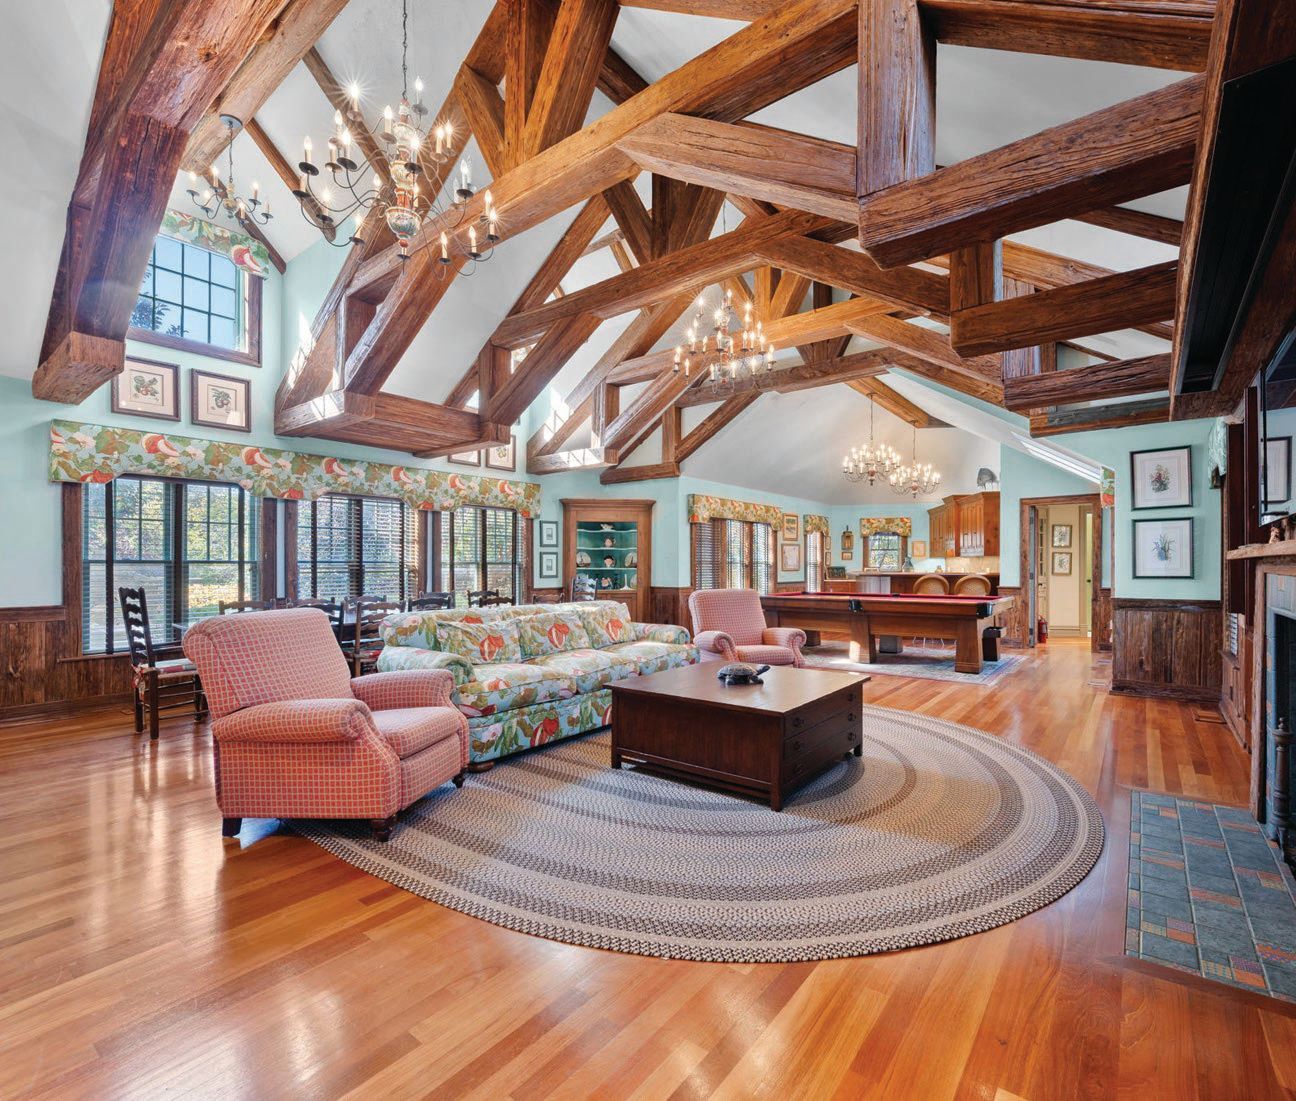 A cathedral ceiling in the main living area wows. PHOTO COURTESY OF BRAND